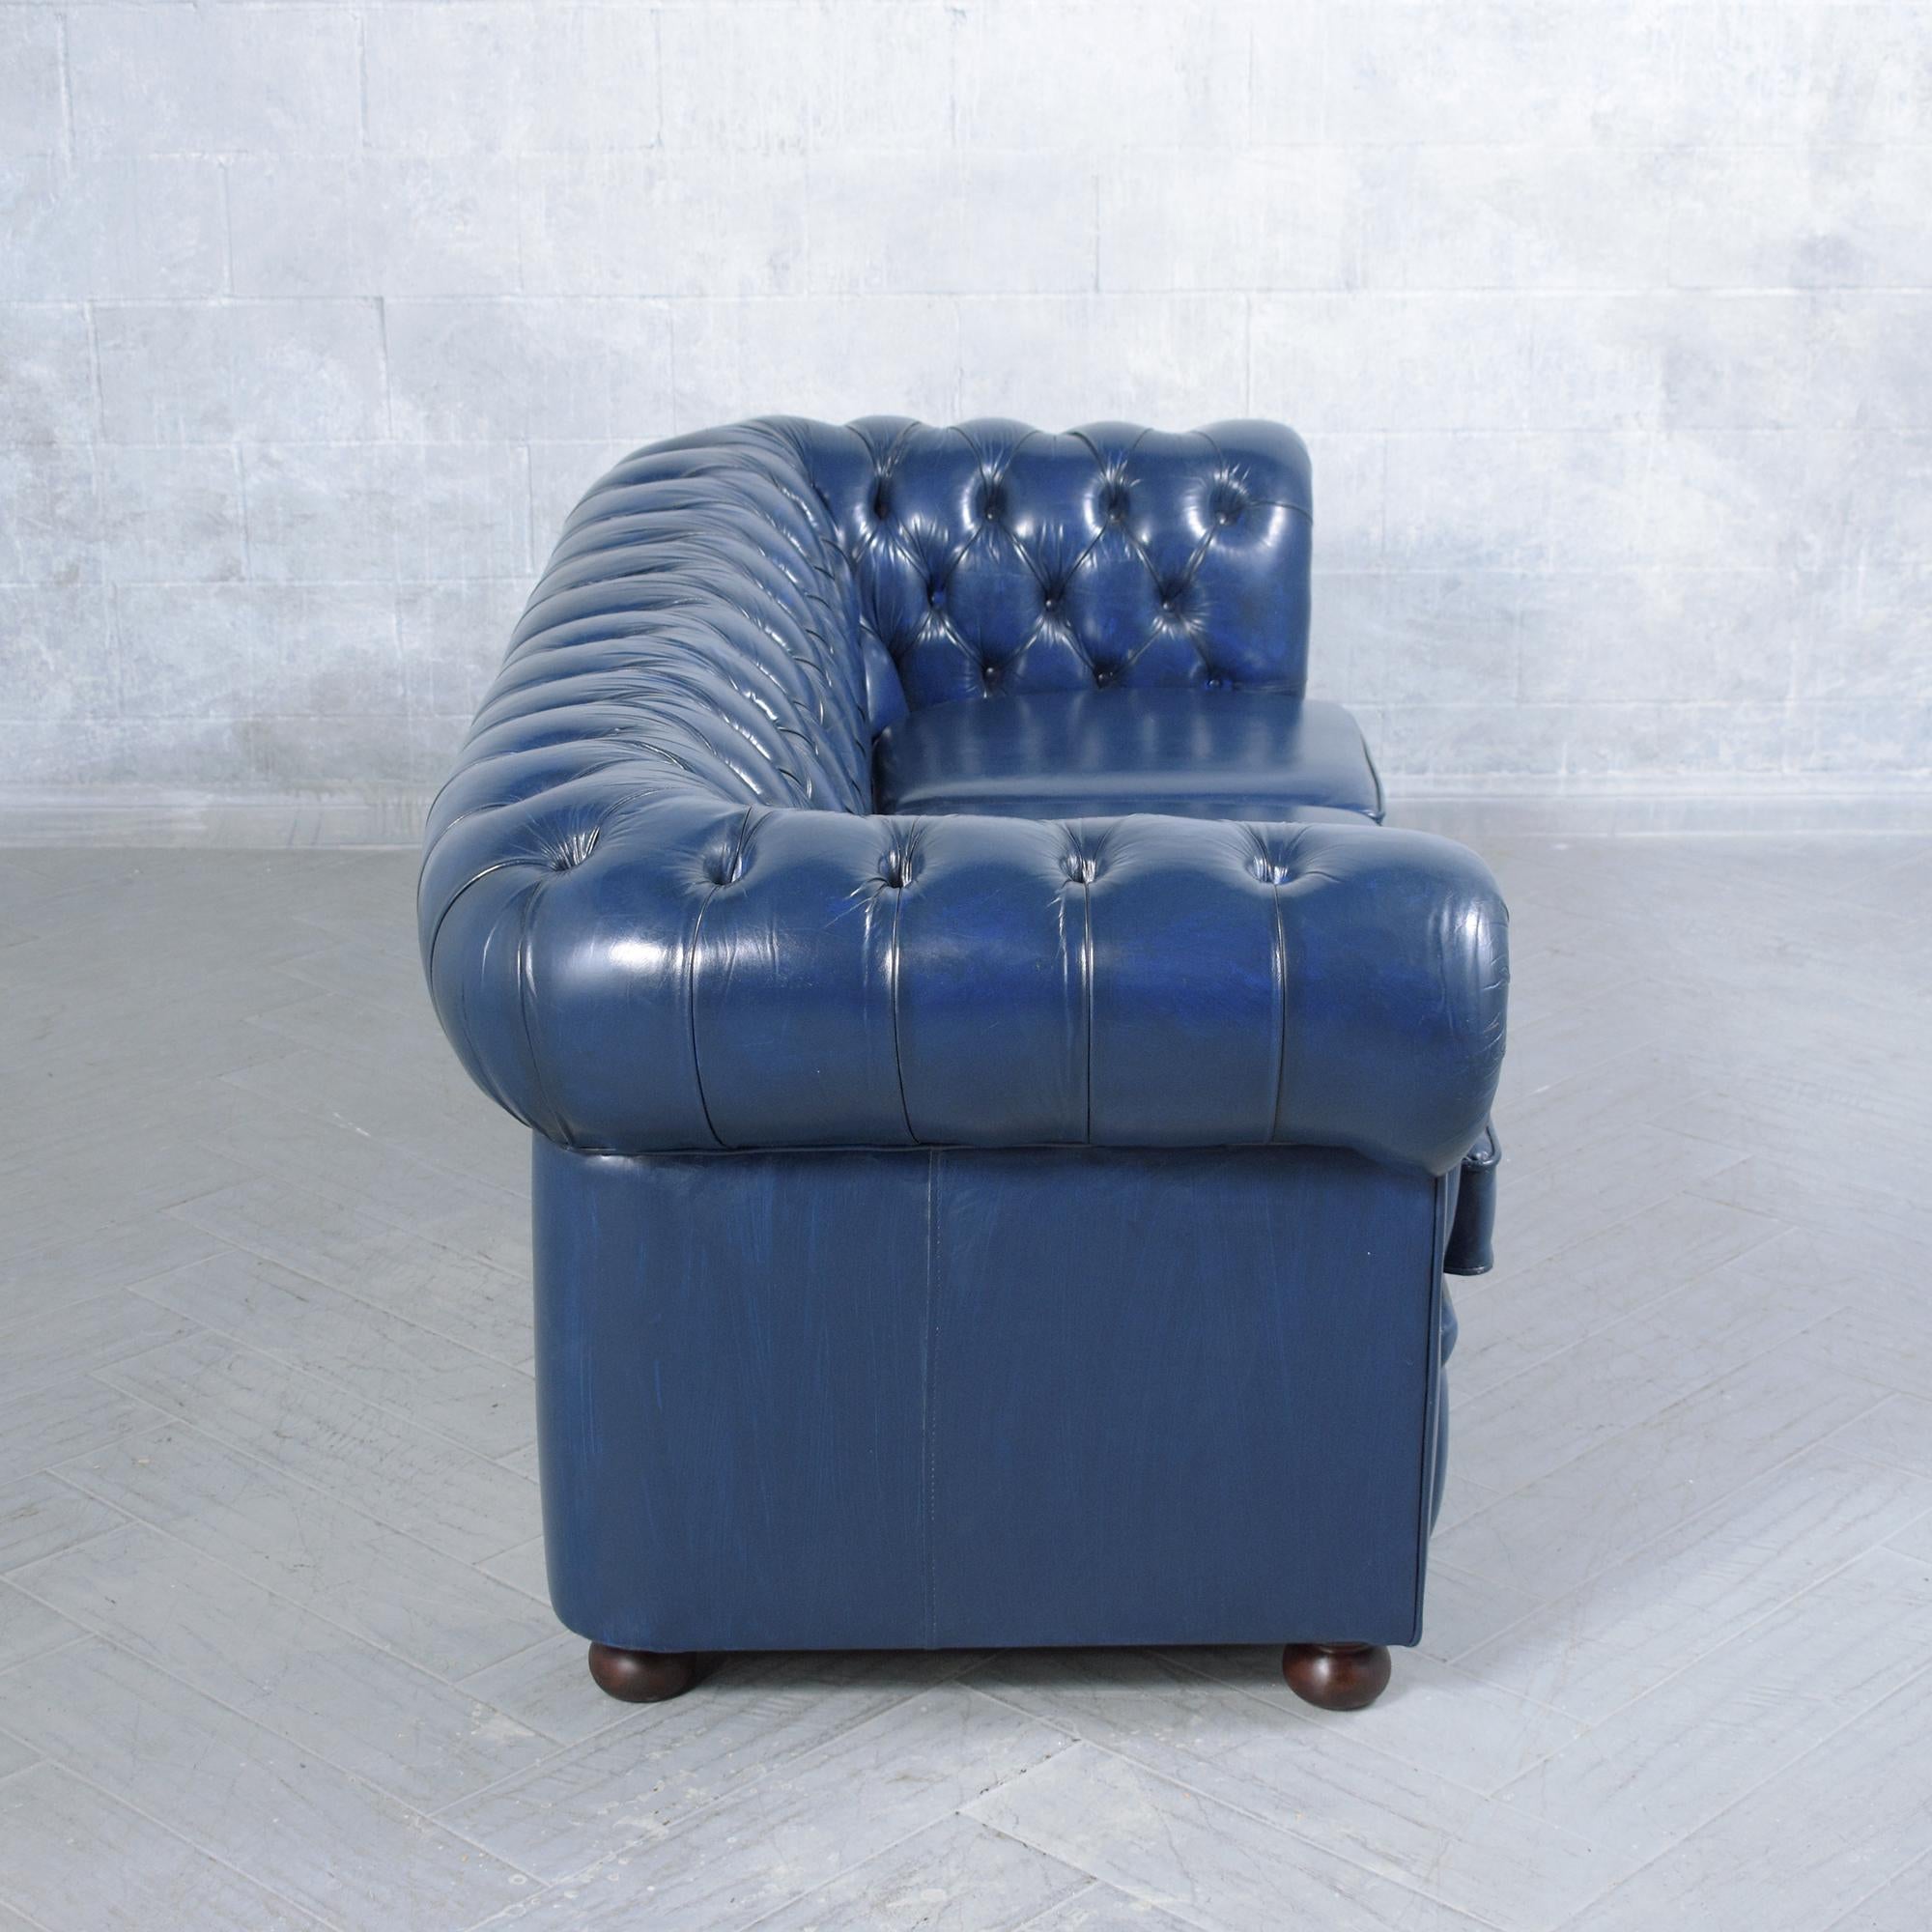 Restored Vintage Chesterfield Sofa in Distressed Navy Leather For Sale 2